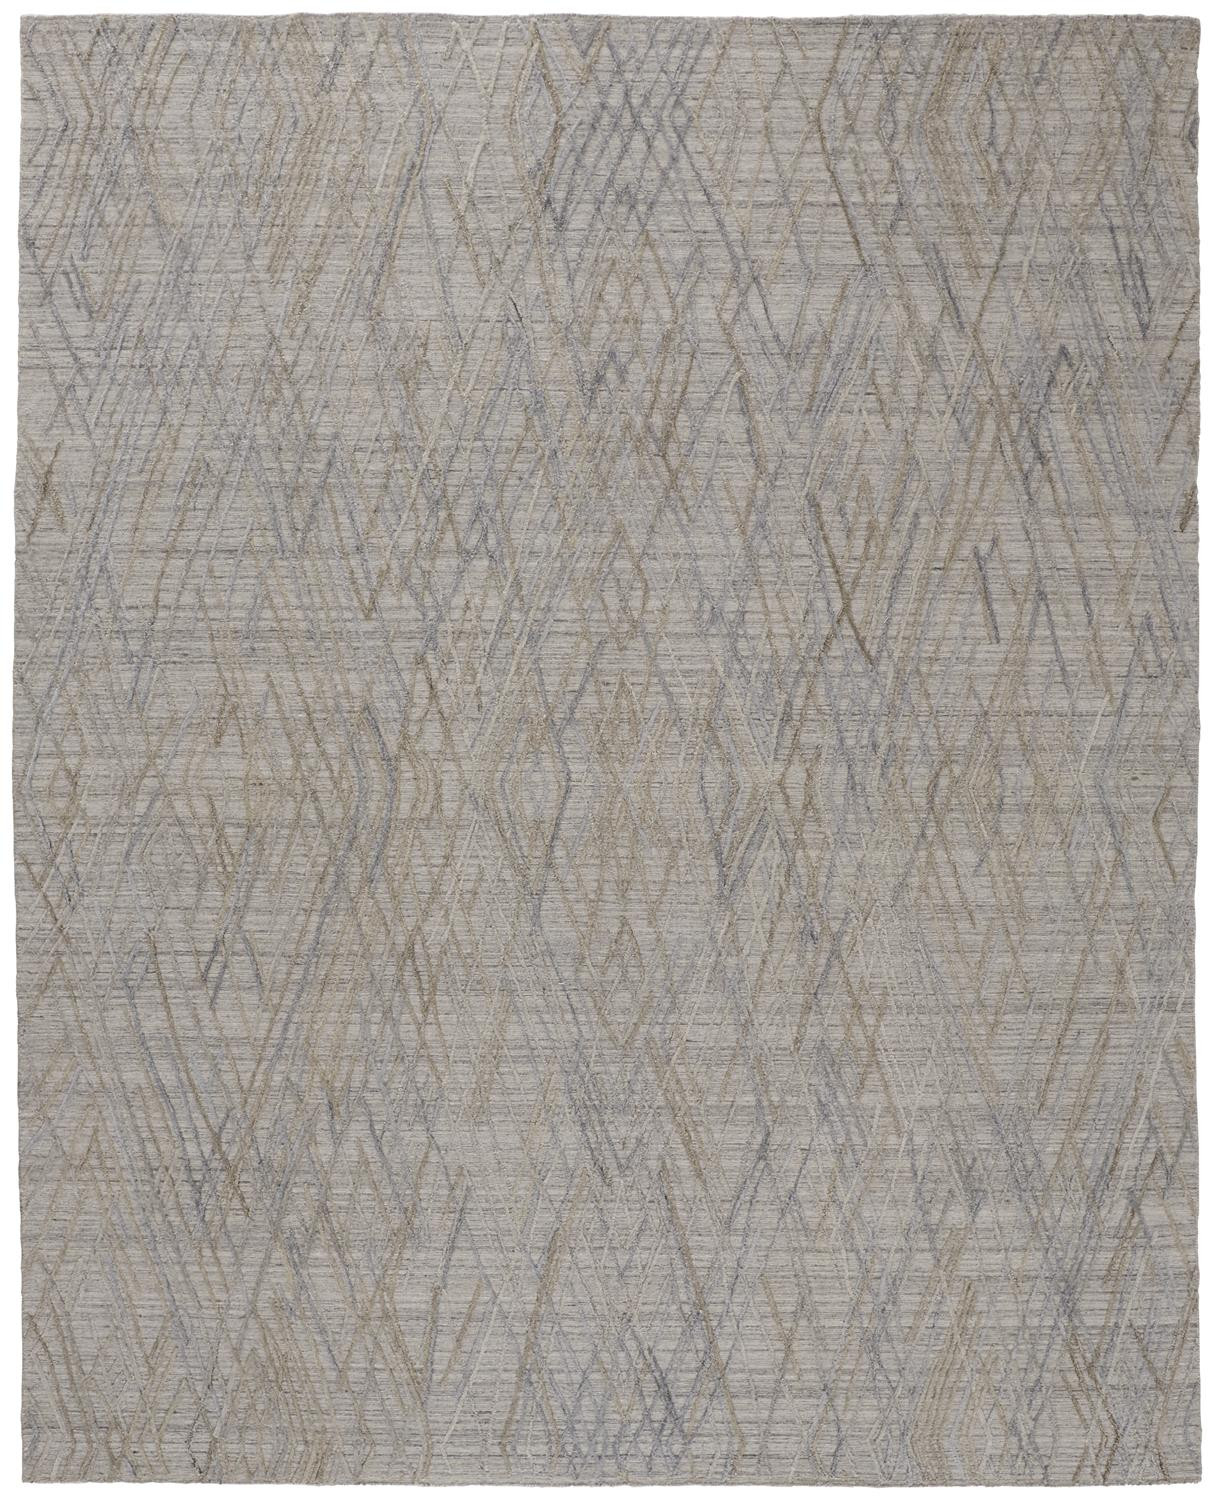 12' X 15' Gray And Blue Abstract Hand Woven Area Rug-513551-1